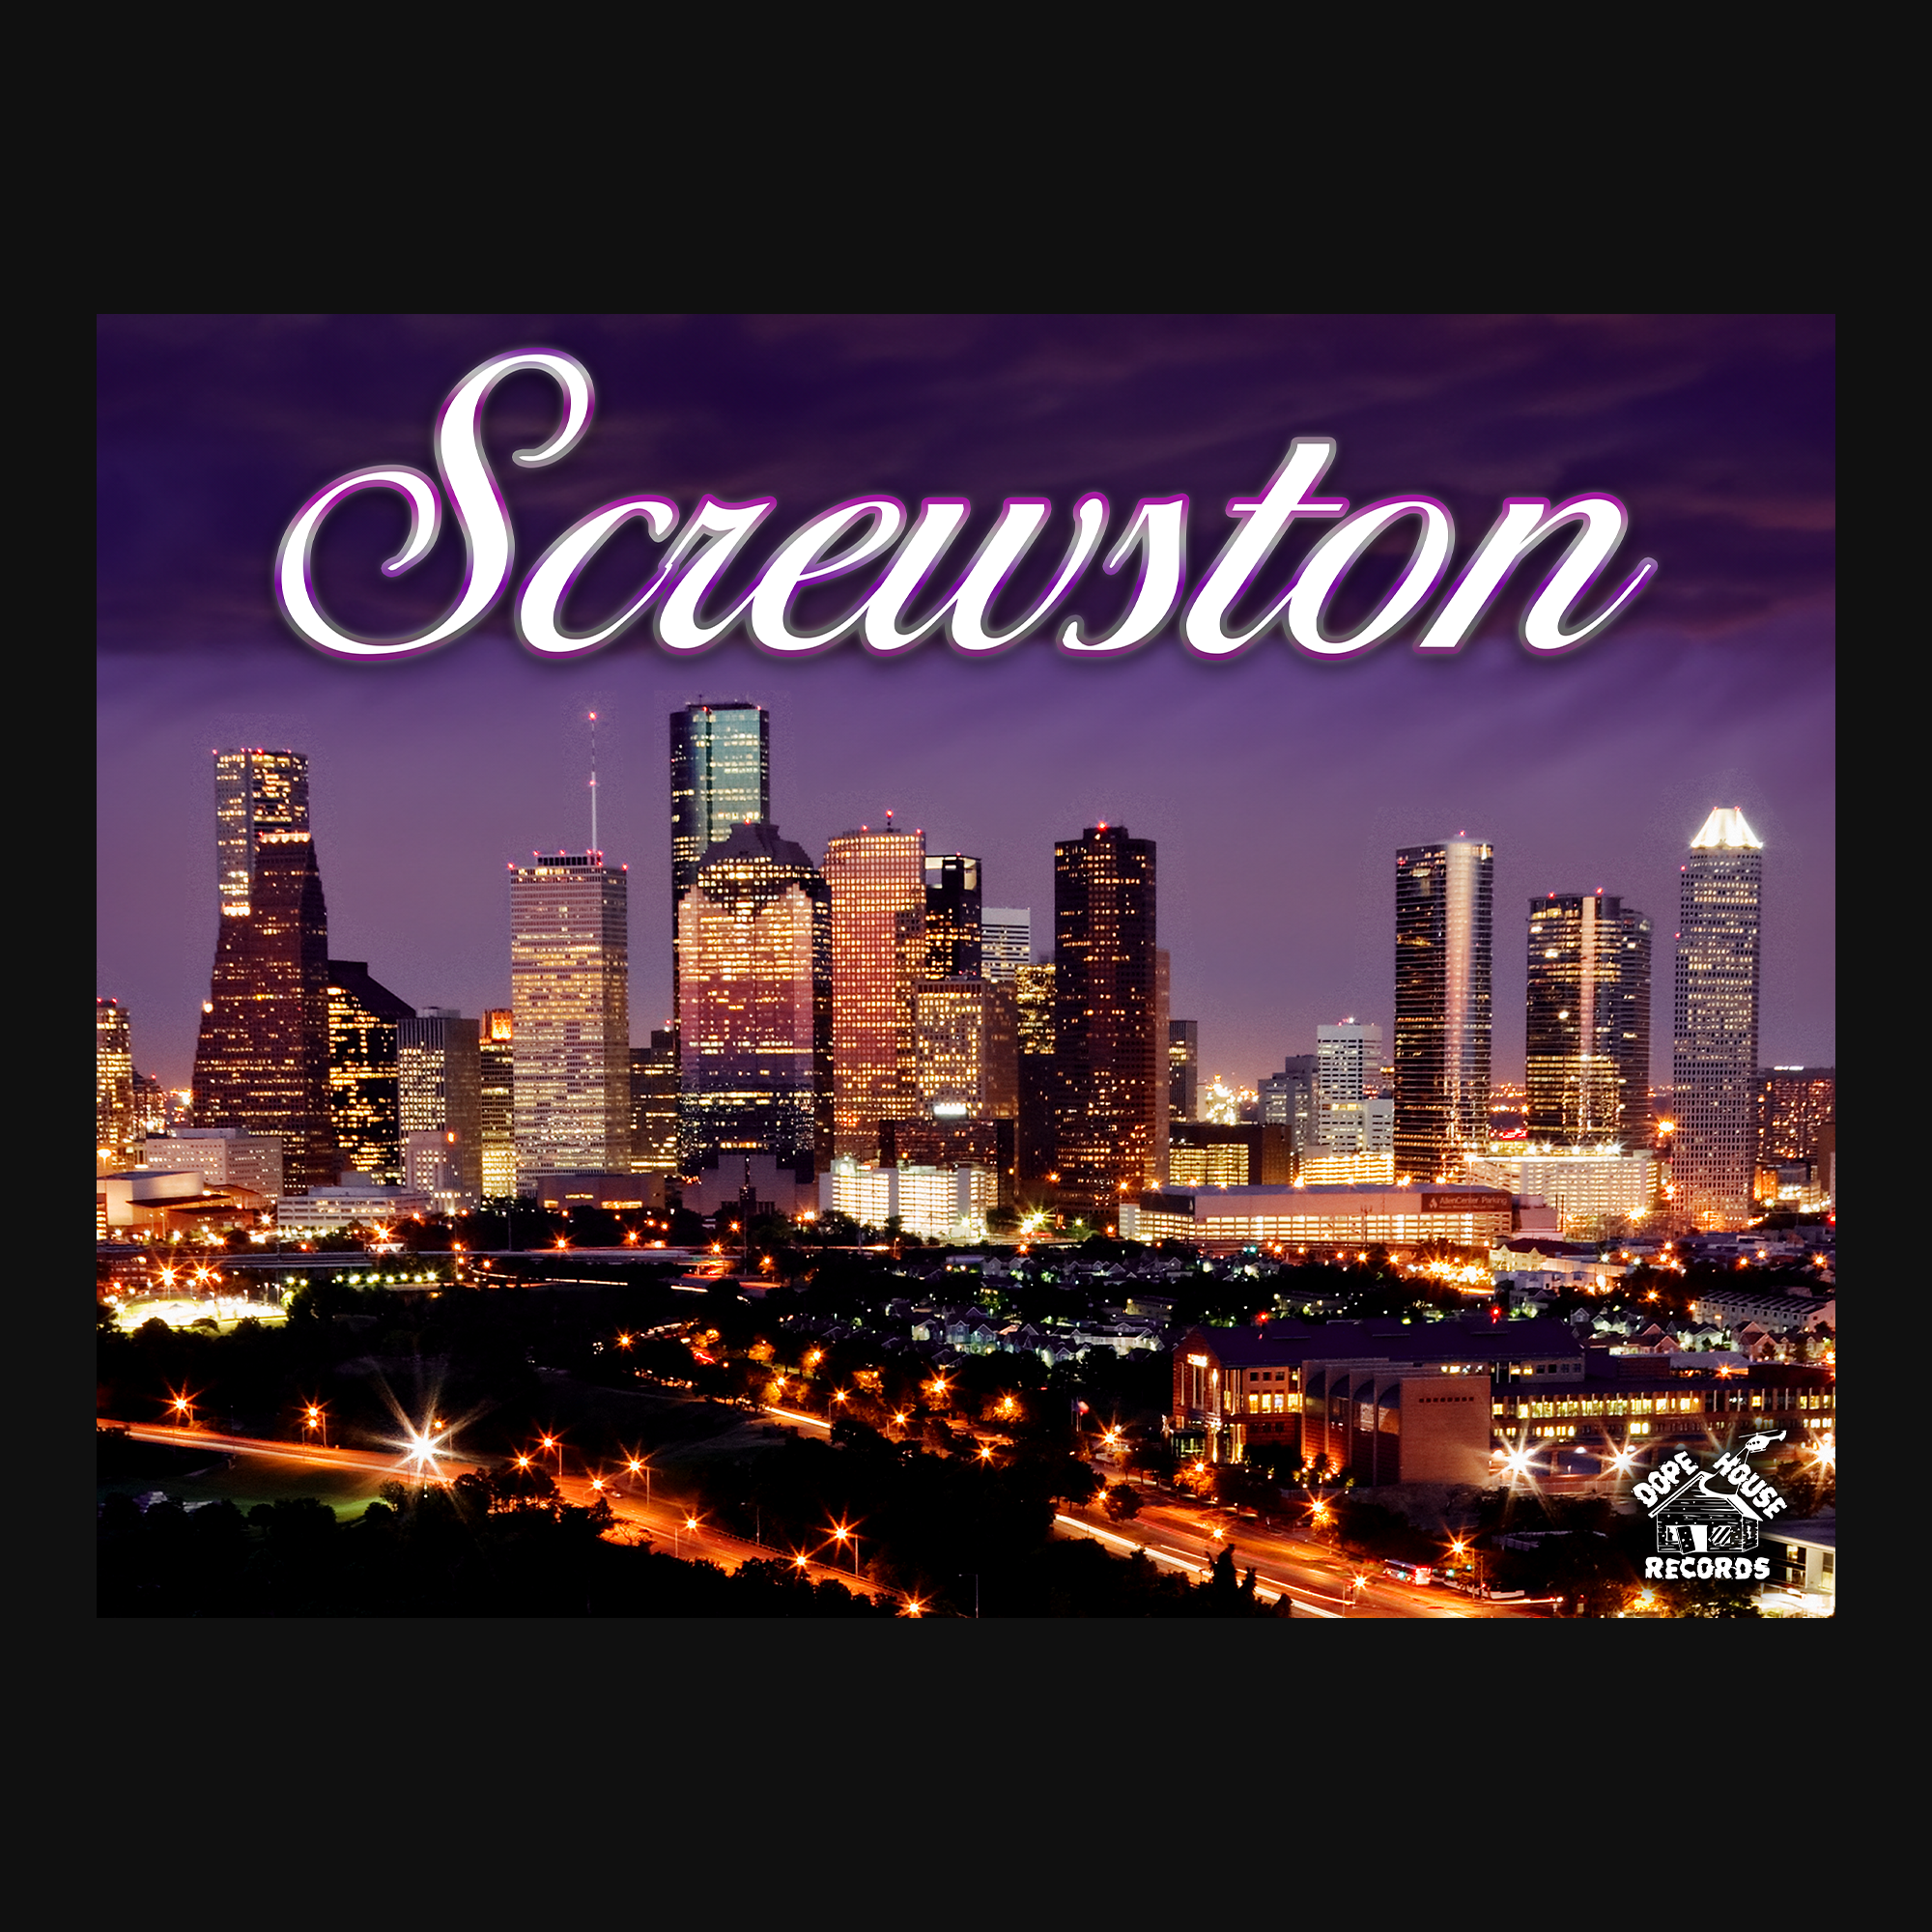 Screwston - Poster - Dope House Records